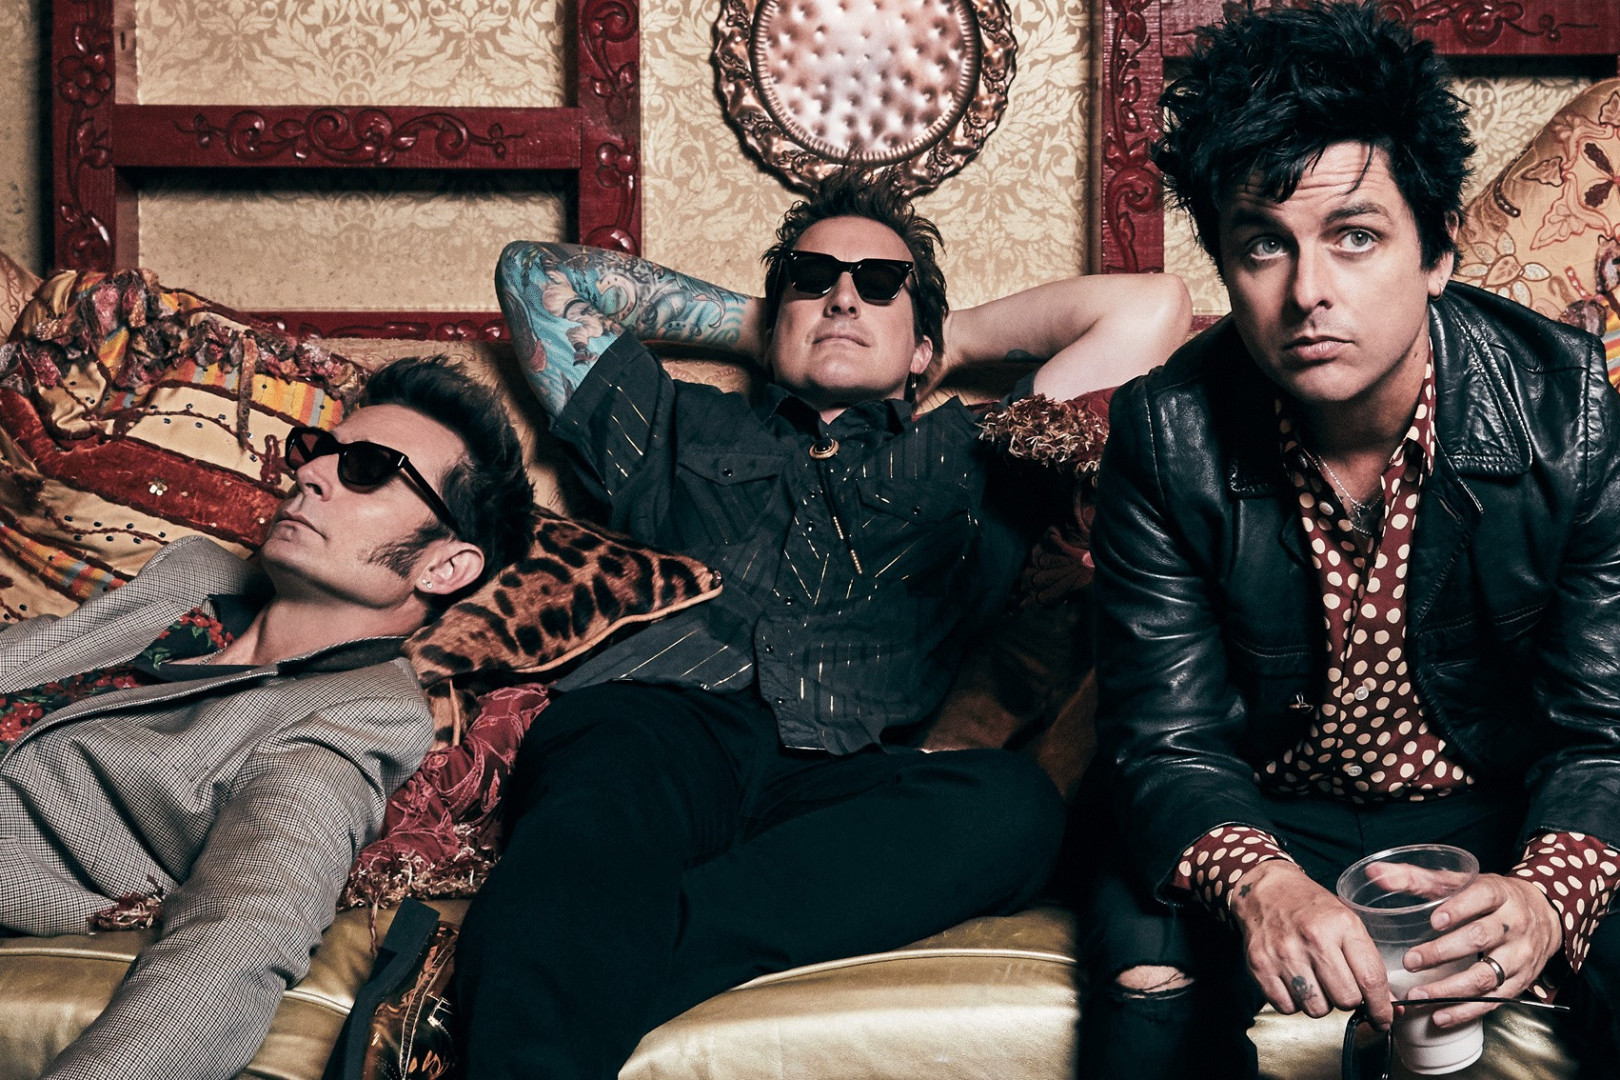 Green Day announce North American and European tour dates, release "Look Ma, No Brains!" video